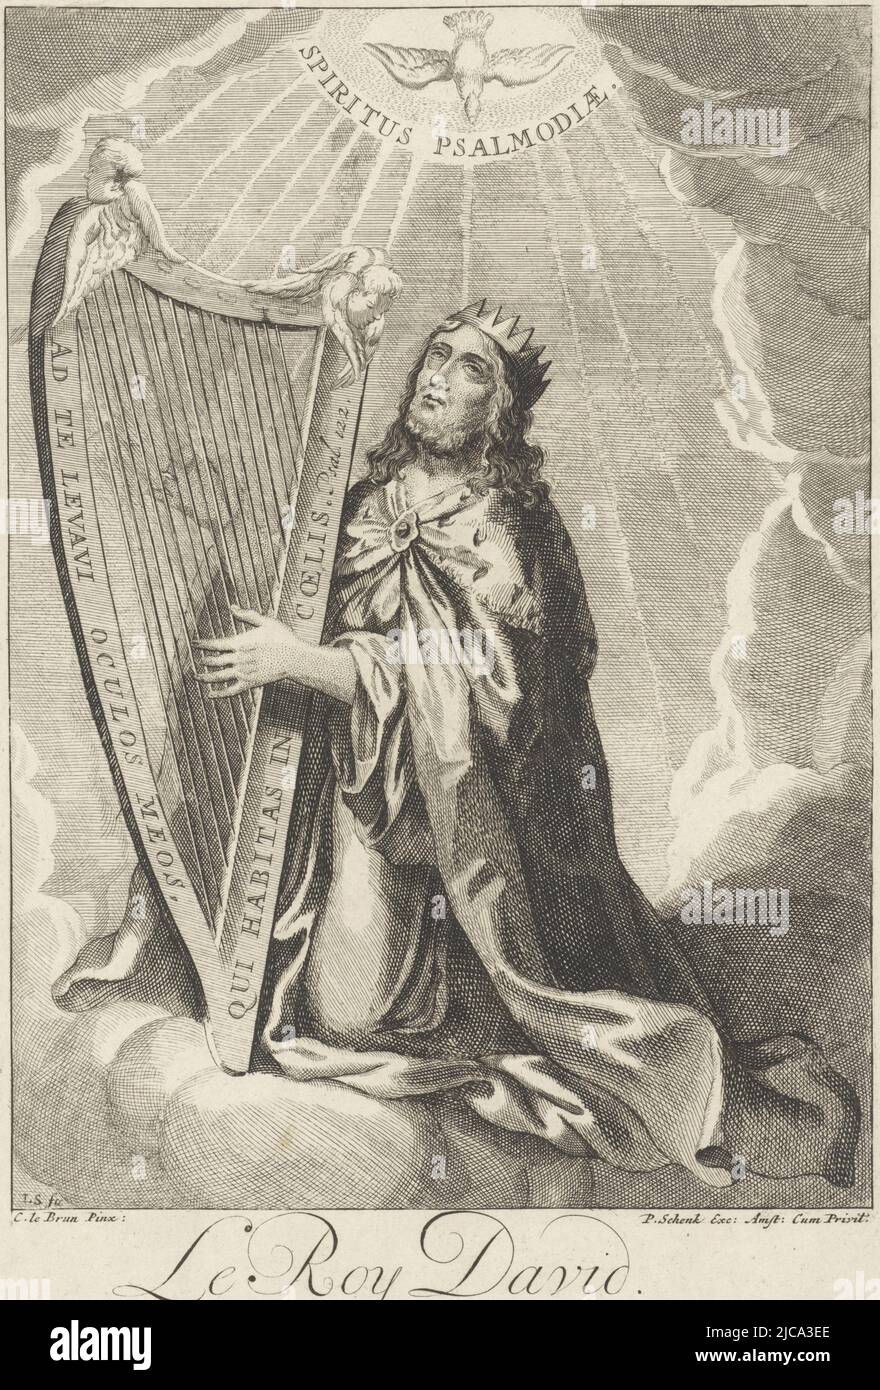 King David kneels on a cloud He plays a harp, which is decorated with two Cherubim? and a text from Ps 122 Above him, a dove descends from heaven Below that is a Latin text indicating that it is a variant of the Holy Spirit, namely the Psalm Spirit, King David as psalm singer Le Roy David , print maker: Leonard Schenk, (mentioned on object), after: Charles Le Brun, (mentioned on object), publisher: Pieter Schenk (II), (mentioned on object), print maker: Amsterdam, after: Paris, publisher: Amsterdam, 1710 - 1767, paper, etching, h 277 mm × w 185 mm Stock Photo